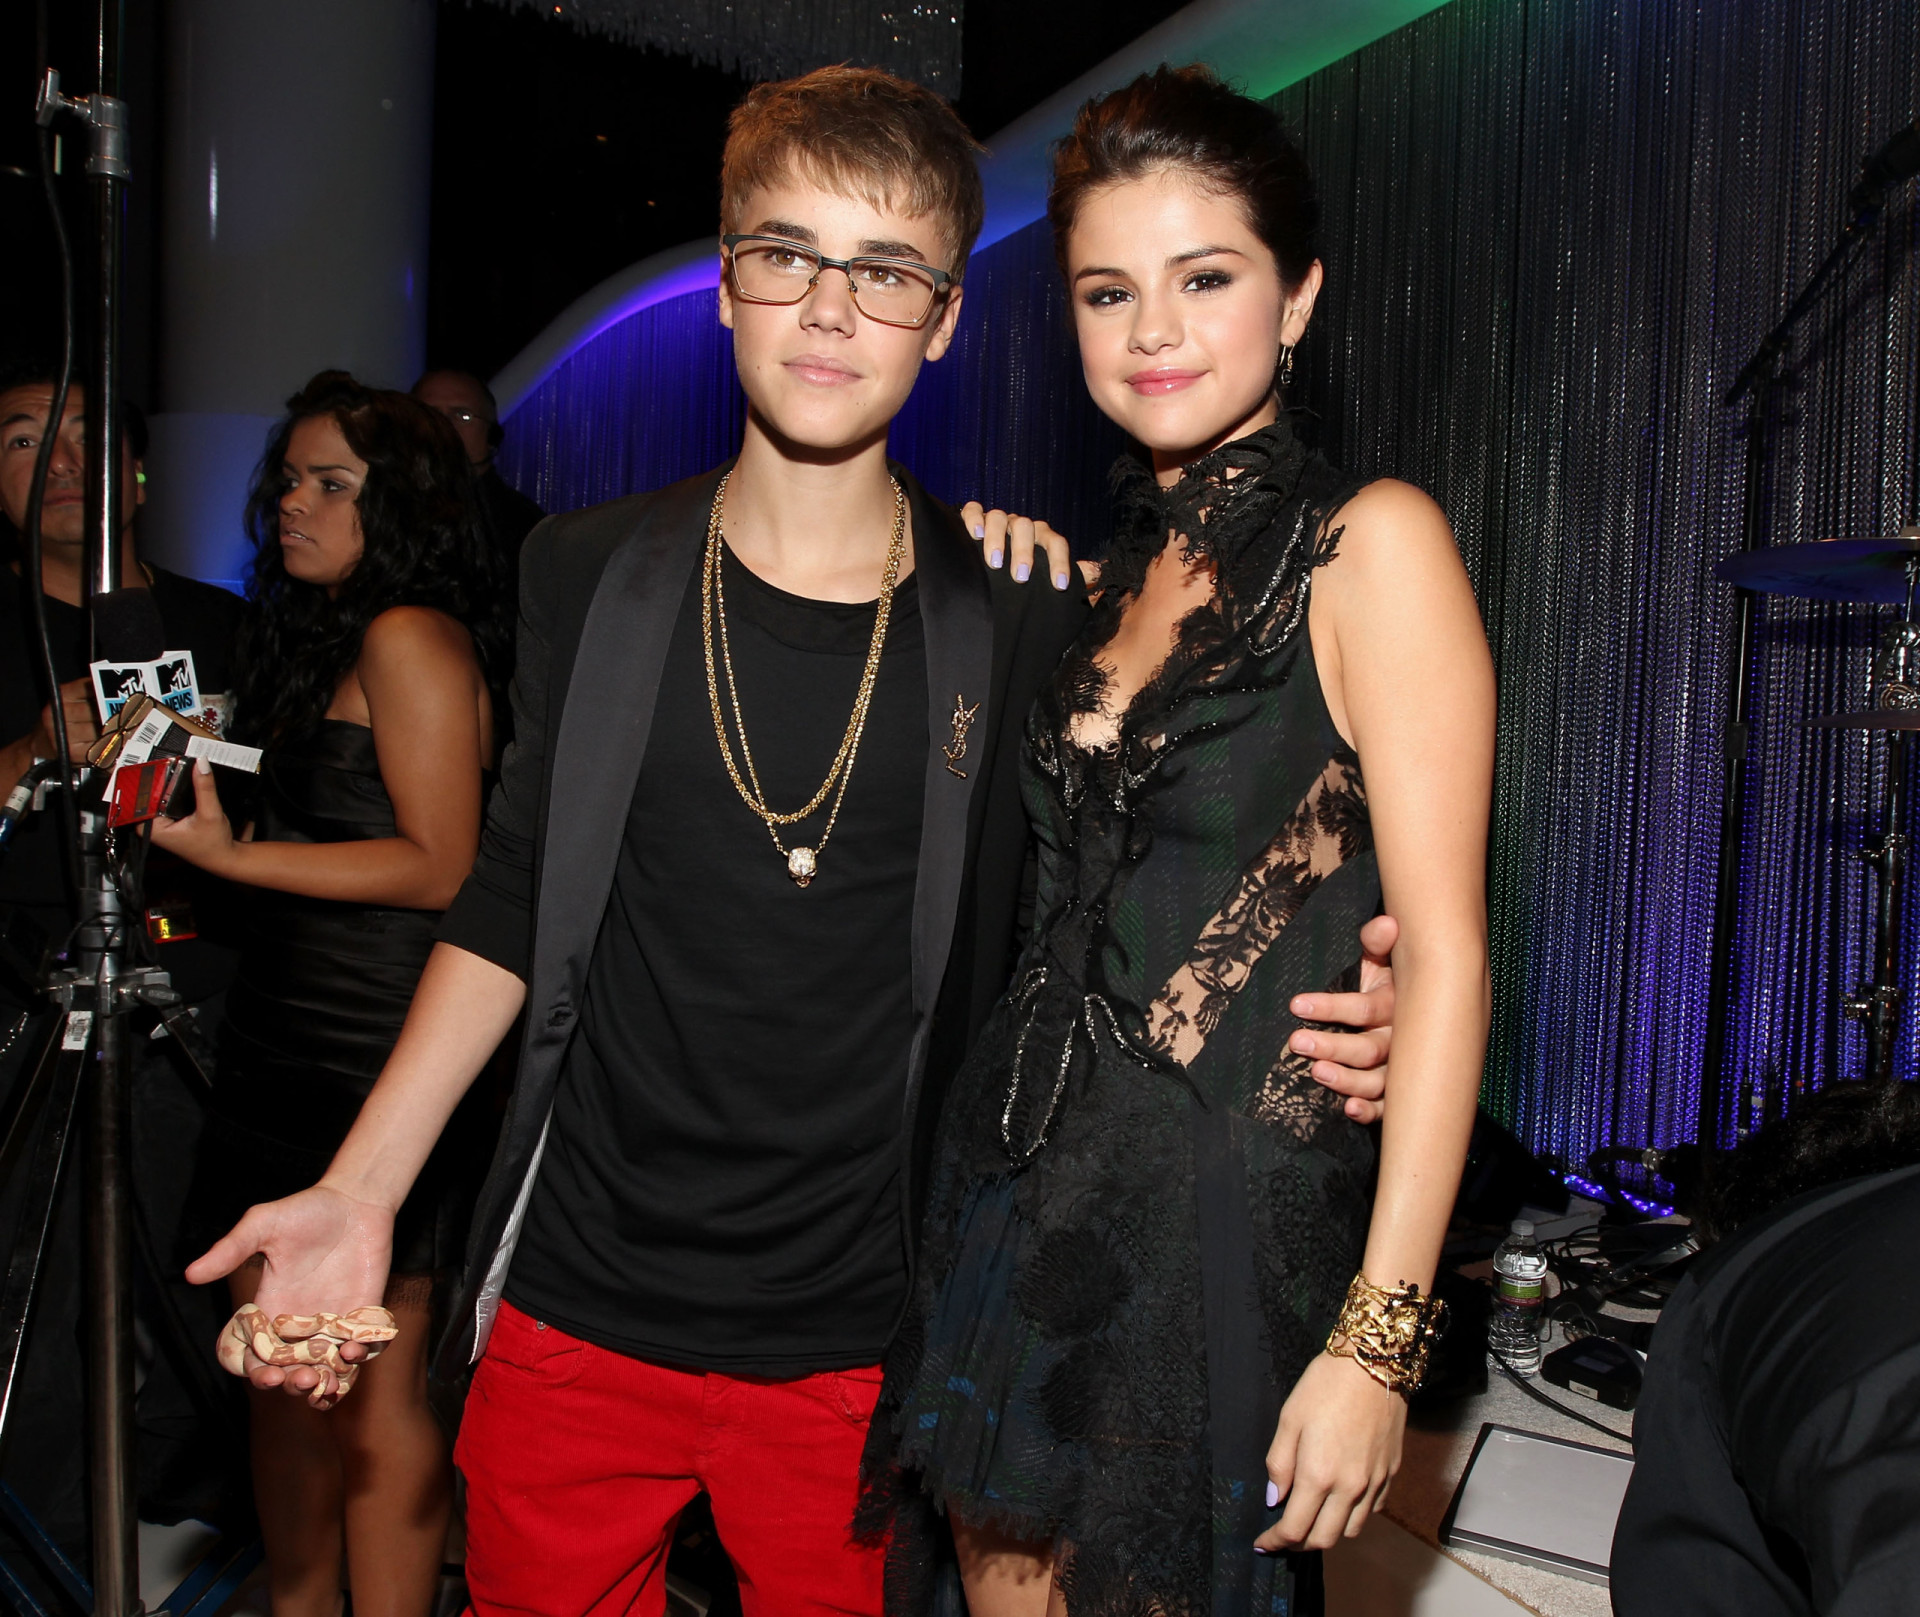 <p>According to reports, Bieber allegedly began sending malicious messages to the singer following their breakup.</p>